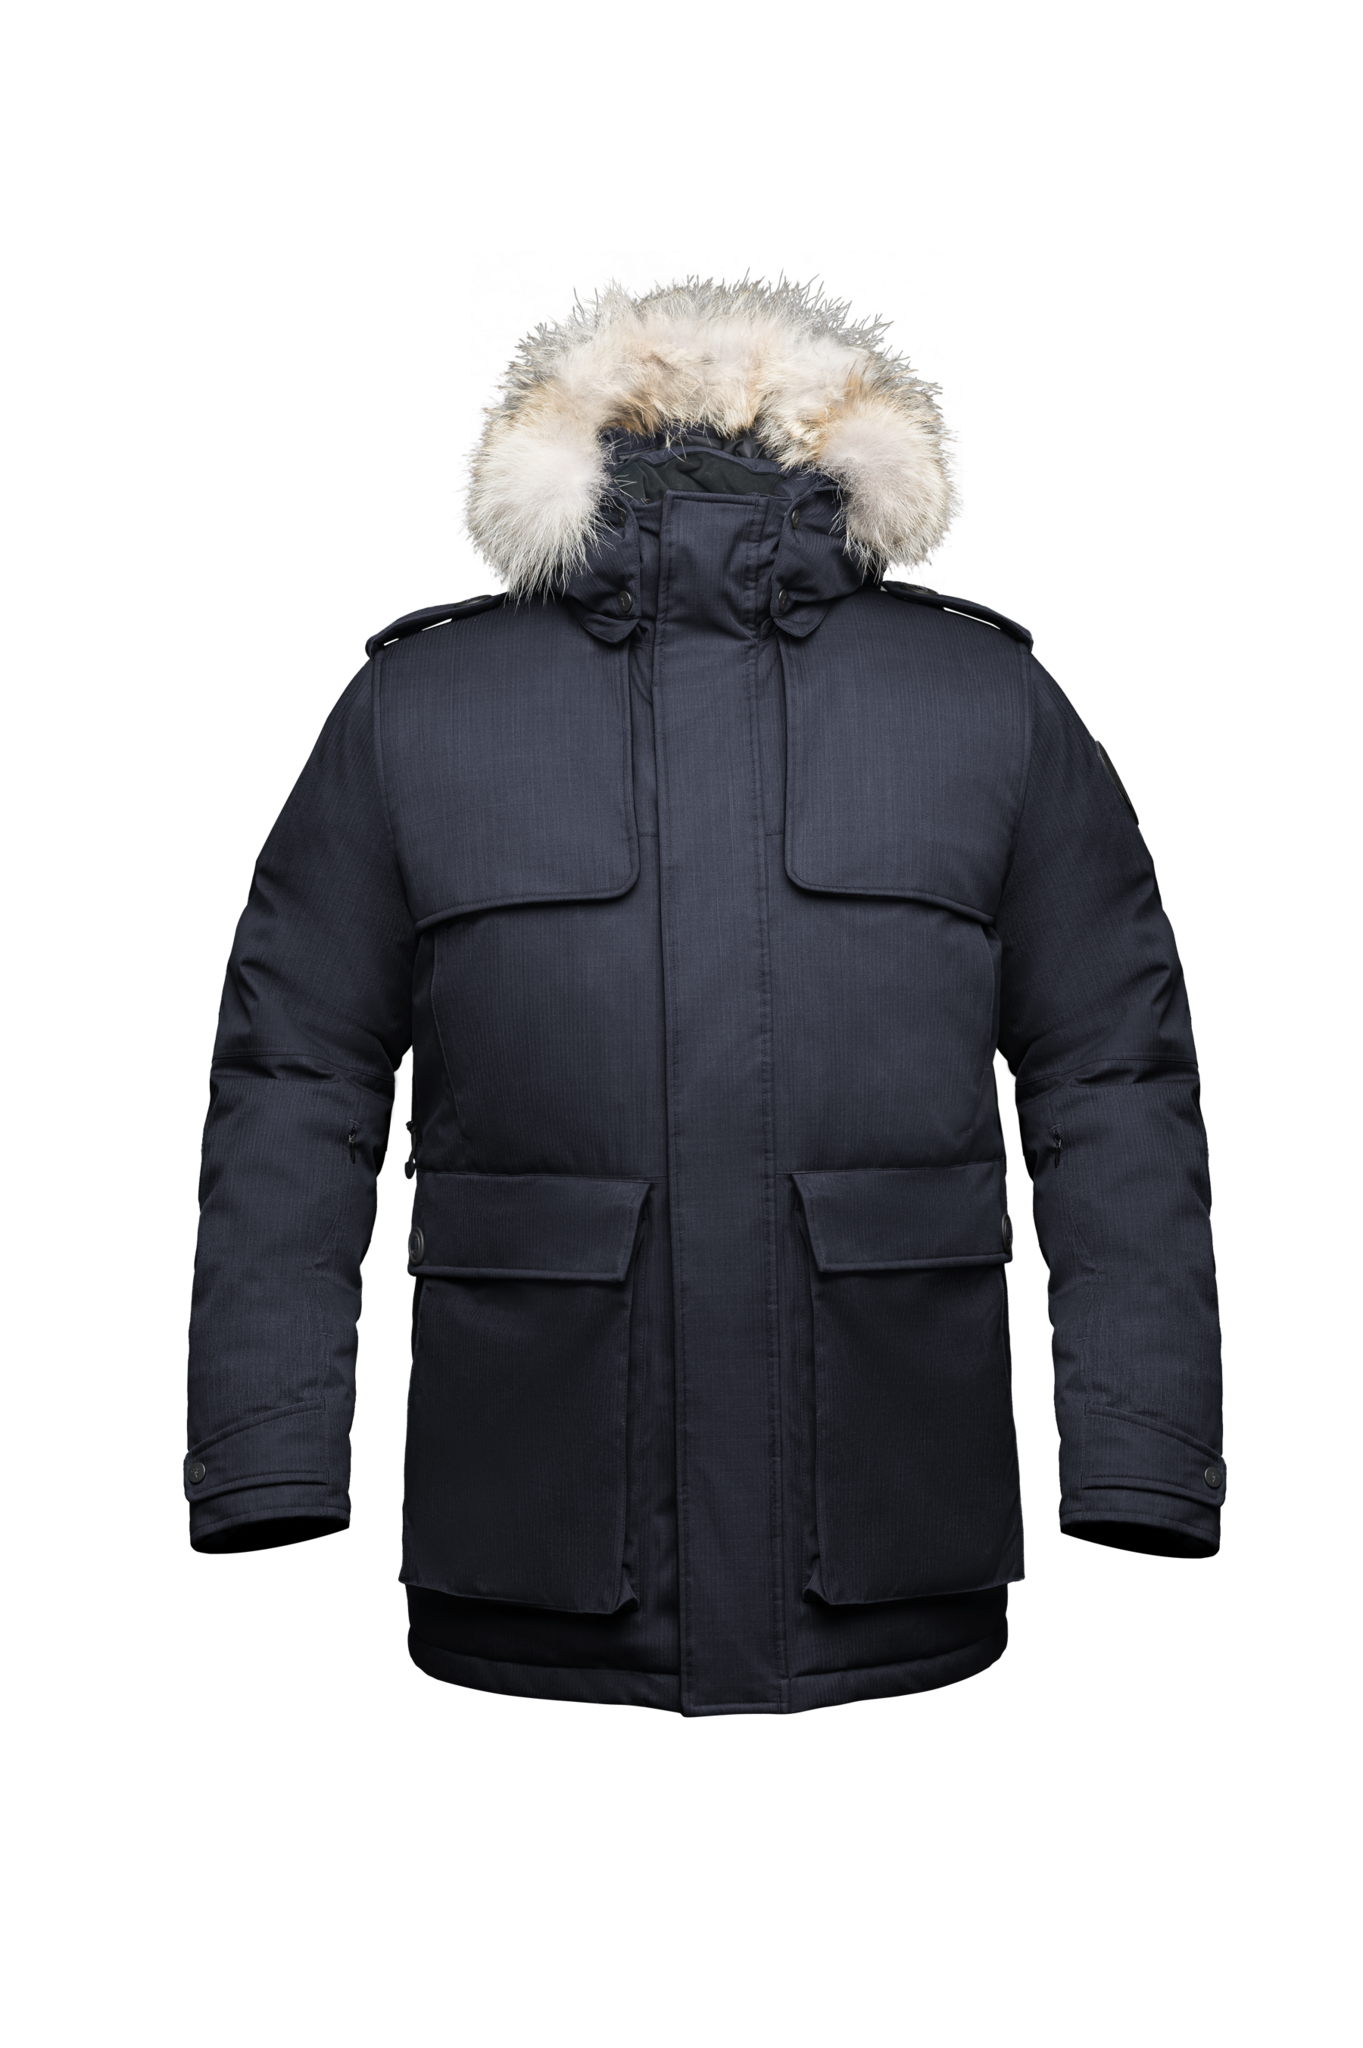 Men's parka with storm patch detail and two patch pockets in CH Navy